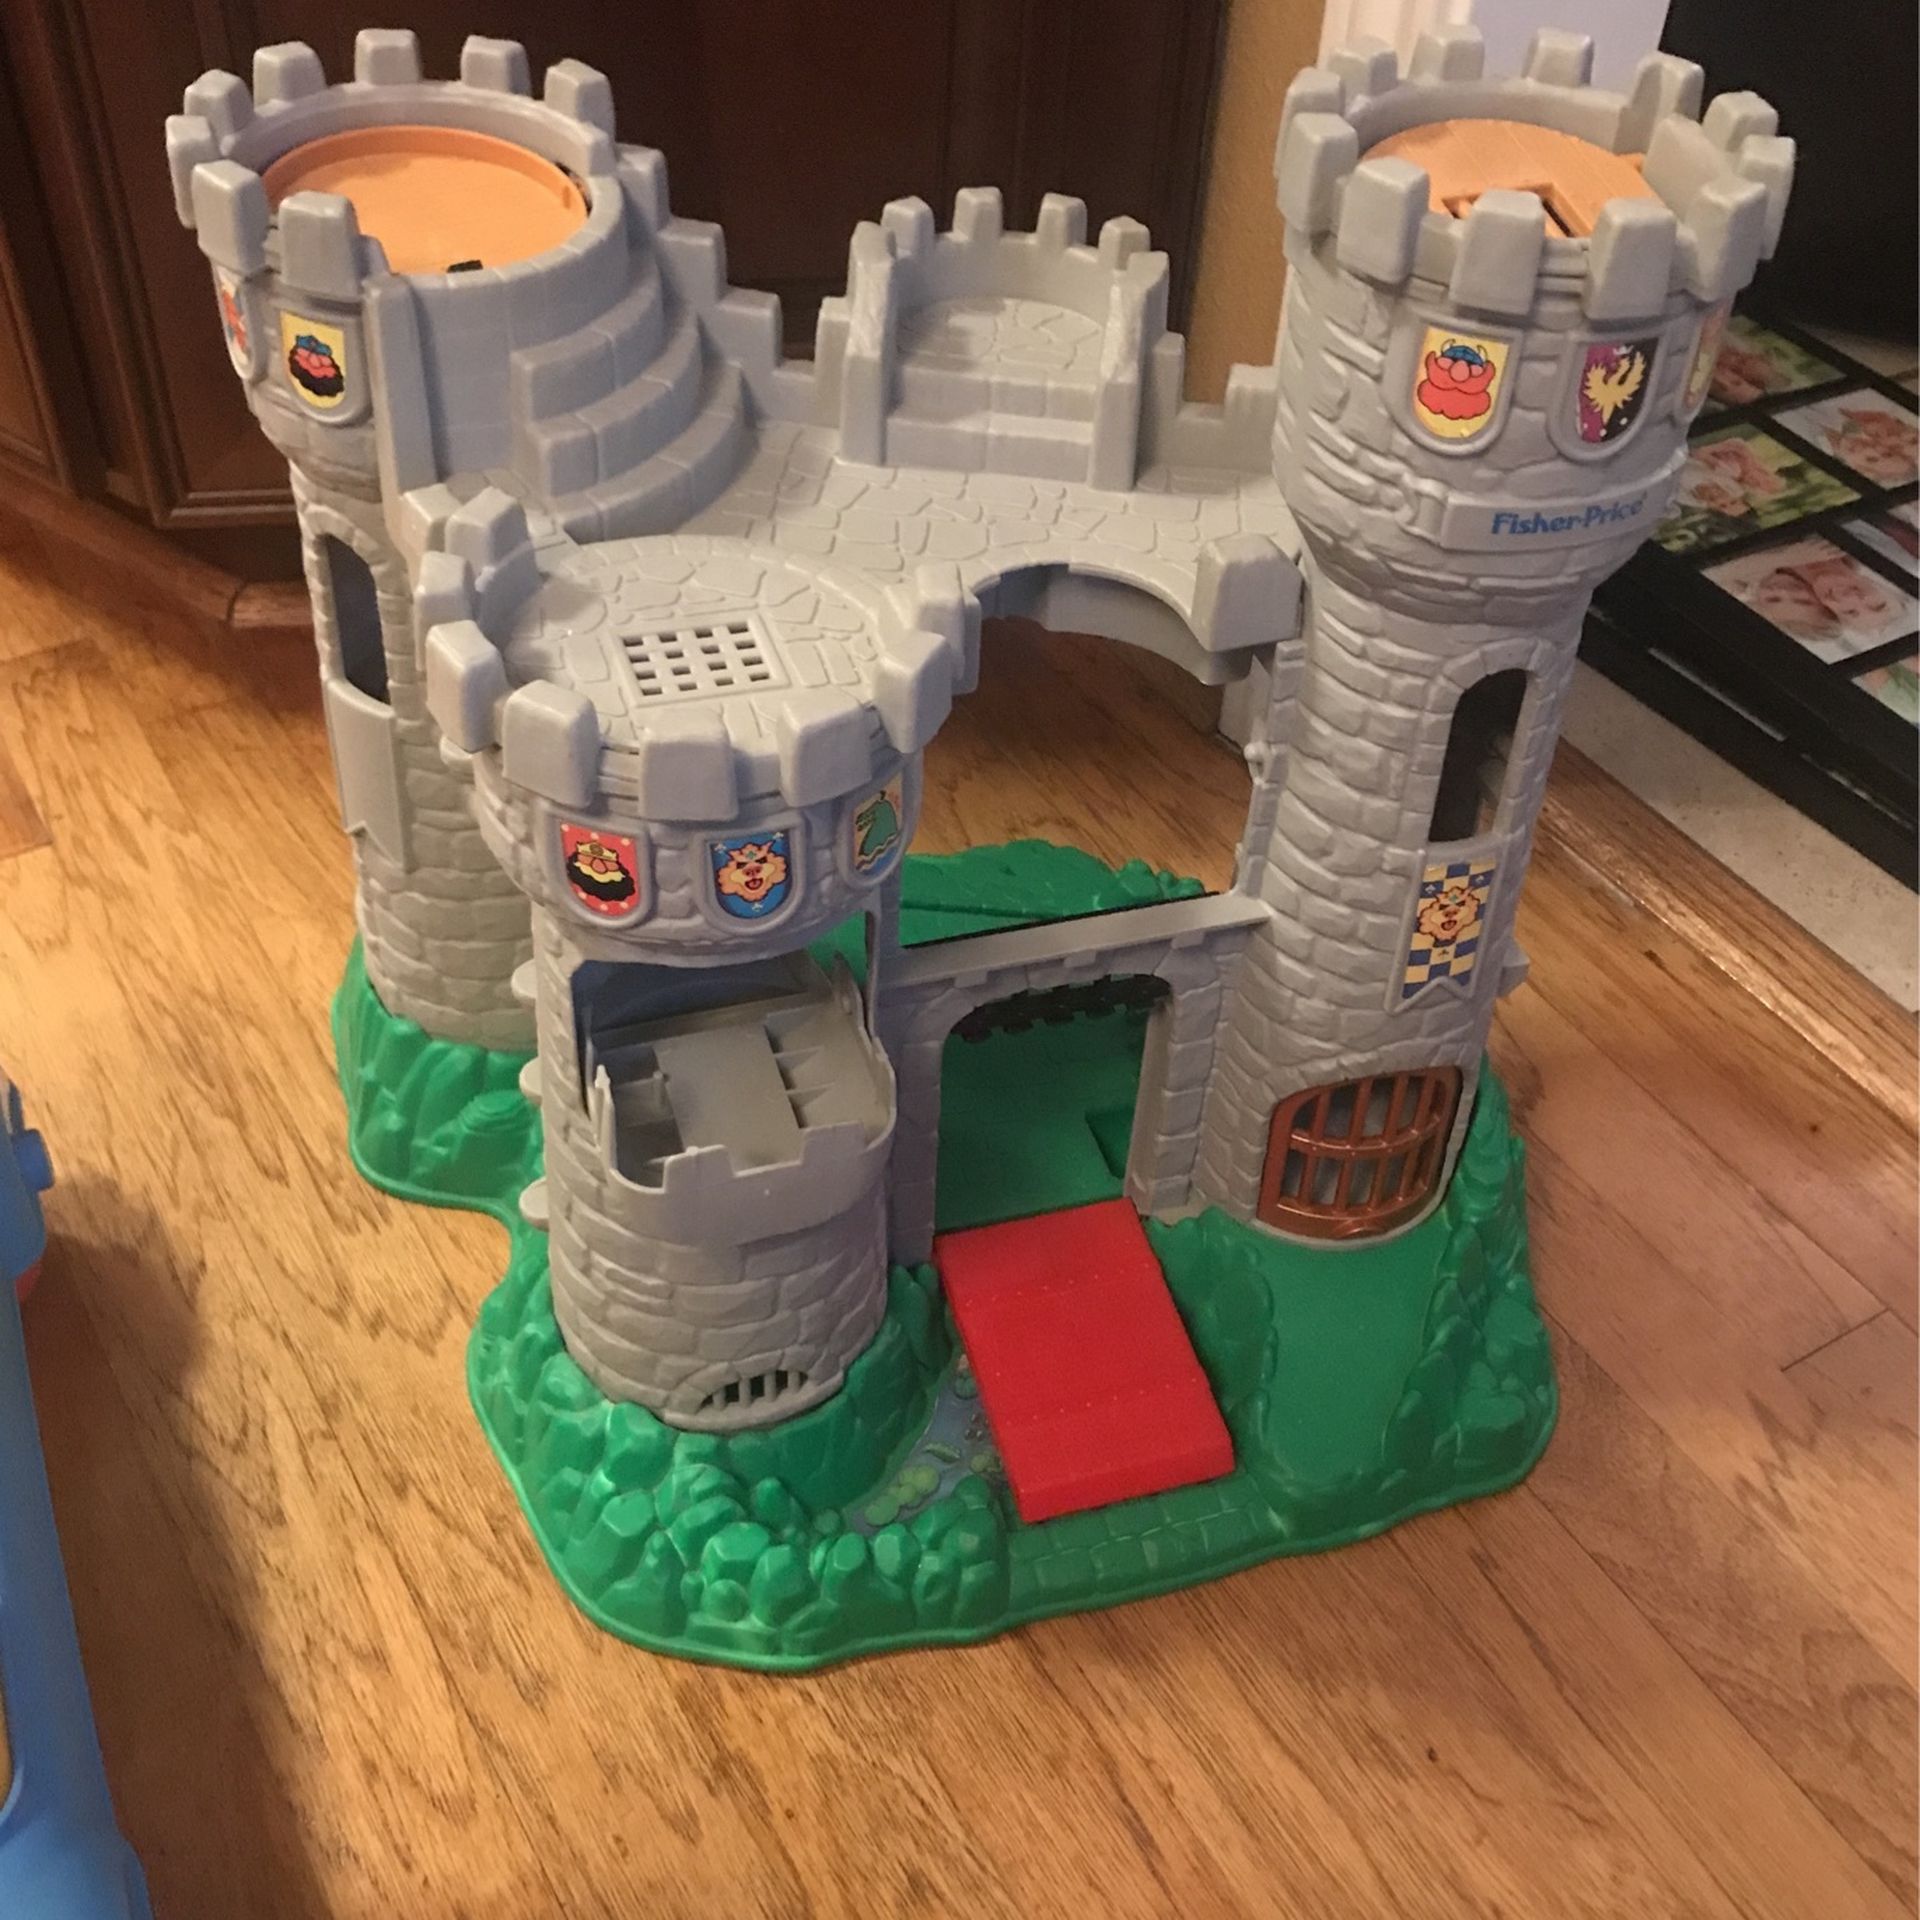 Fisher Price Imaginext Castle